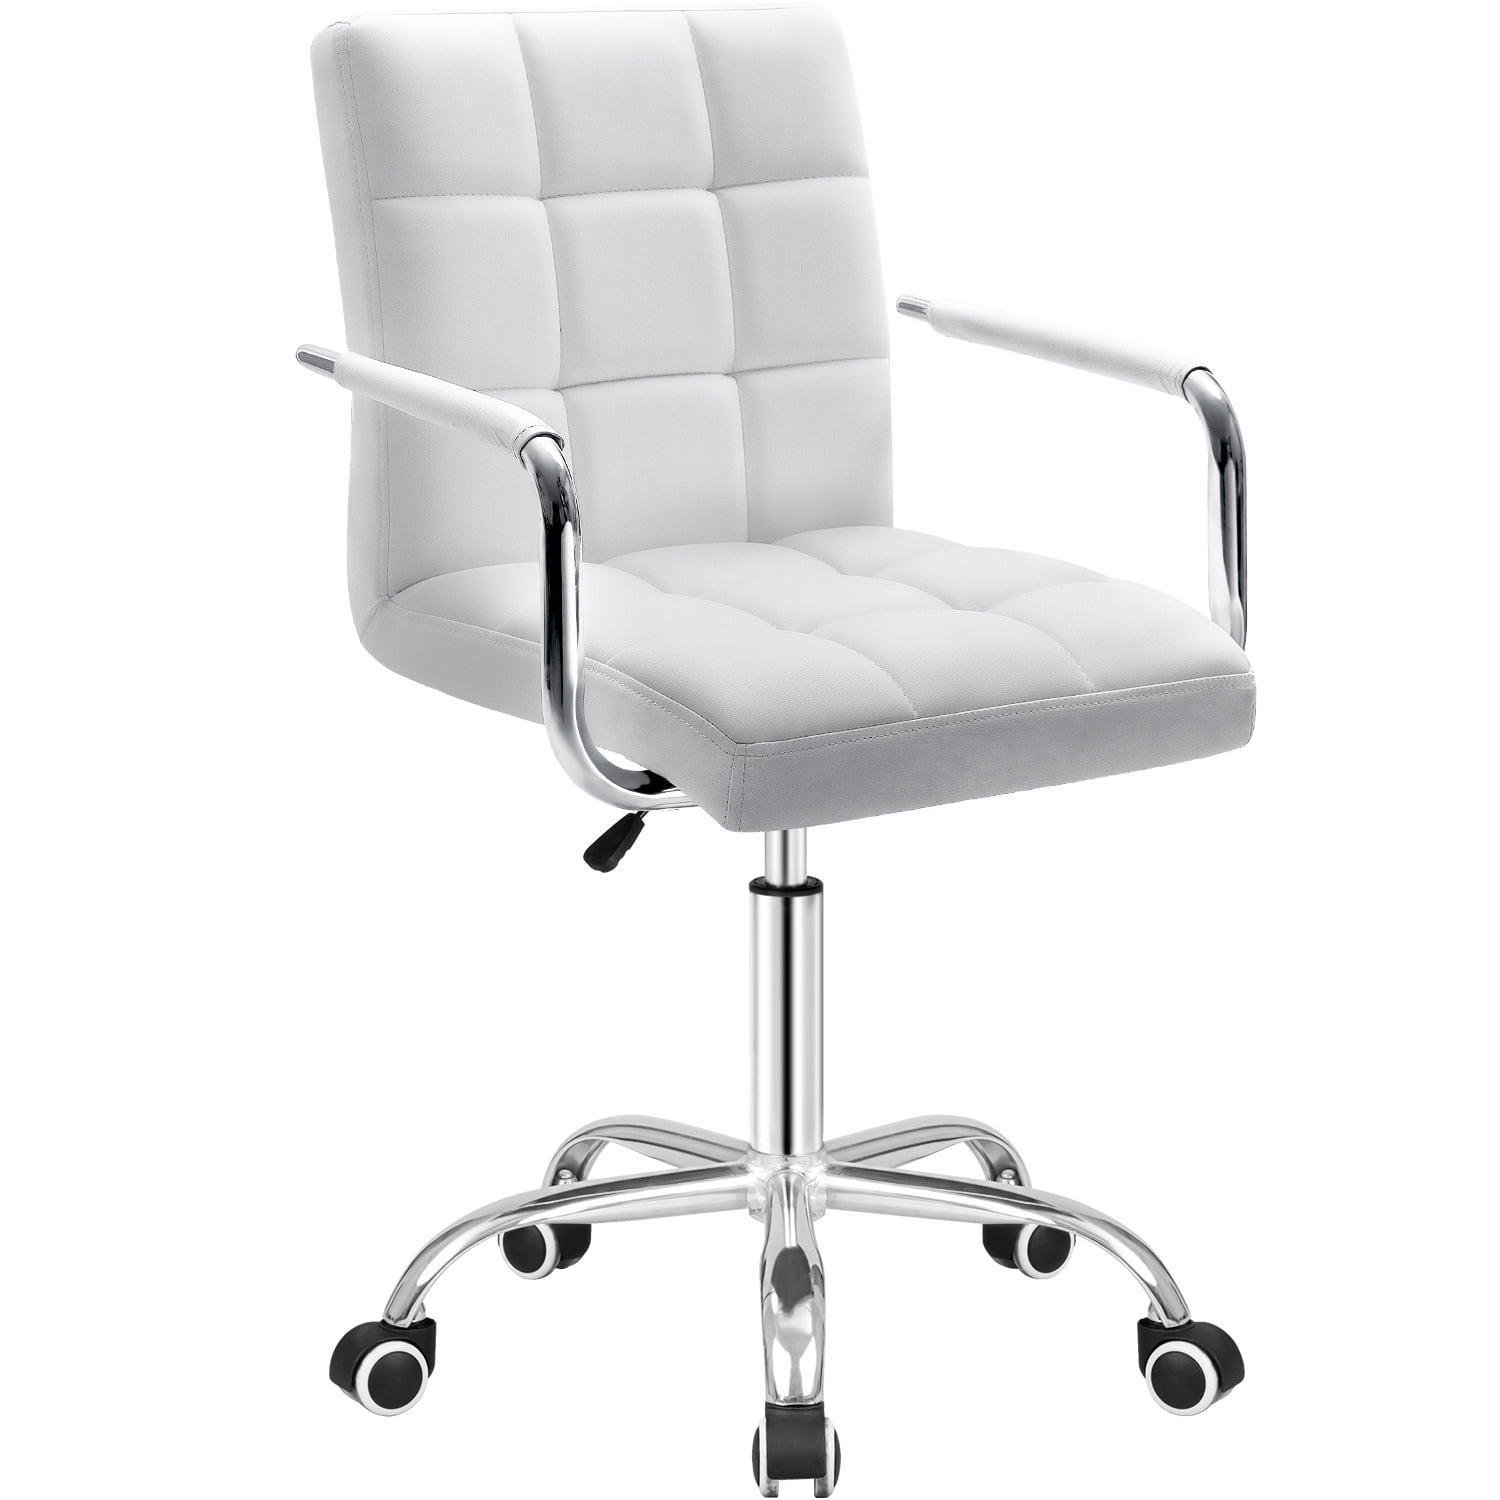 Furmax Task Chair with Swivel & Adjustable Height, 260 lb